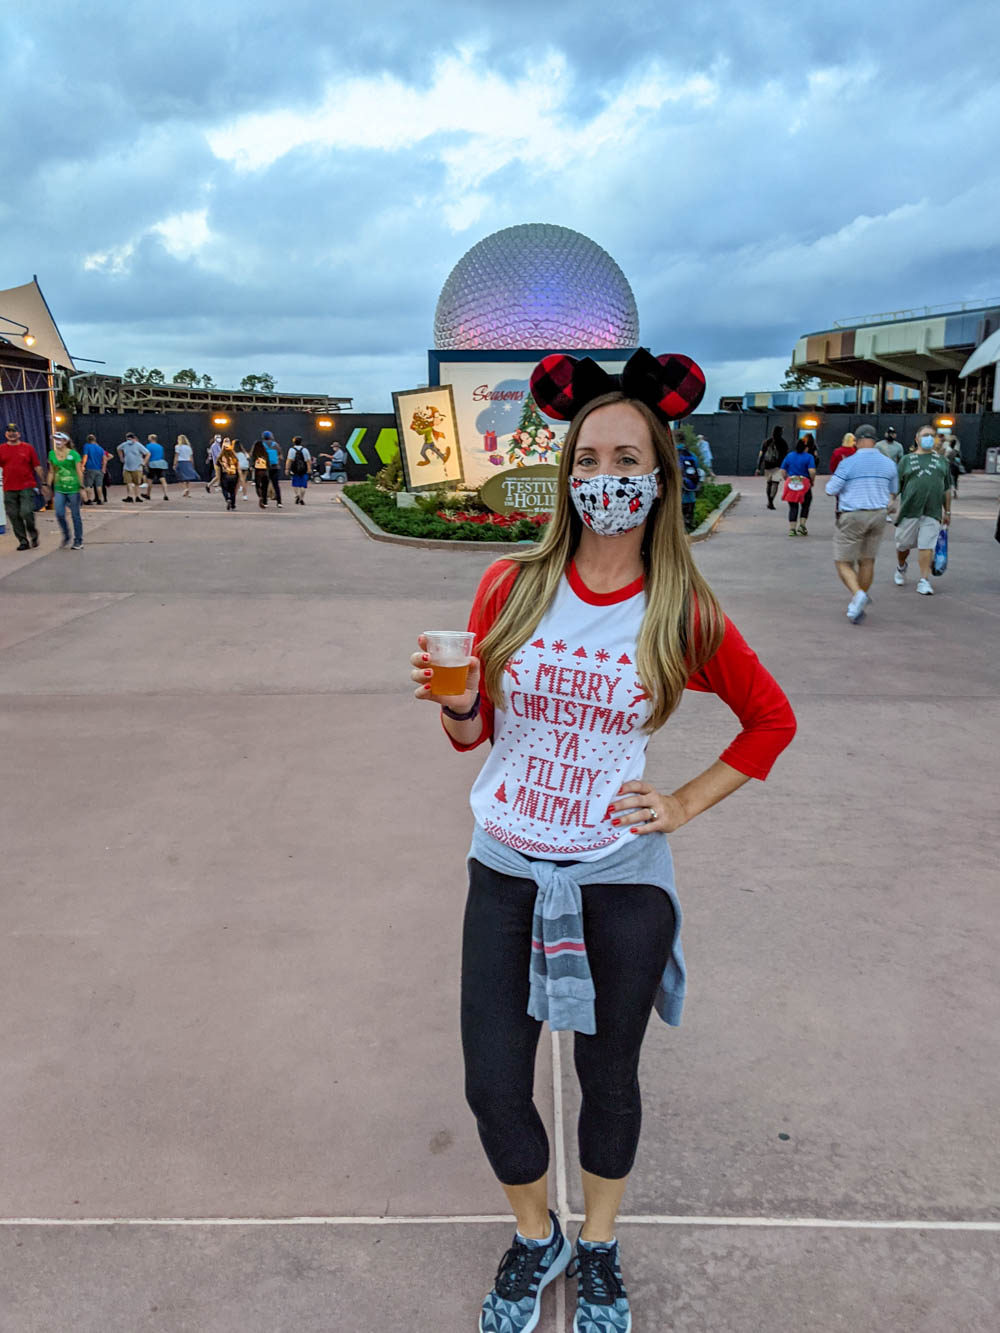 Visiting Disney World During the Pandemic: Everything You’re Eager to Know | Disney World in 2020, what it's like to visit disney world right now. | Epcot Festival of the Holidays